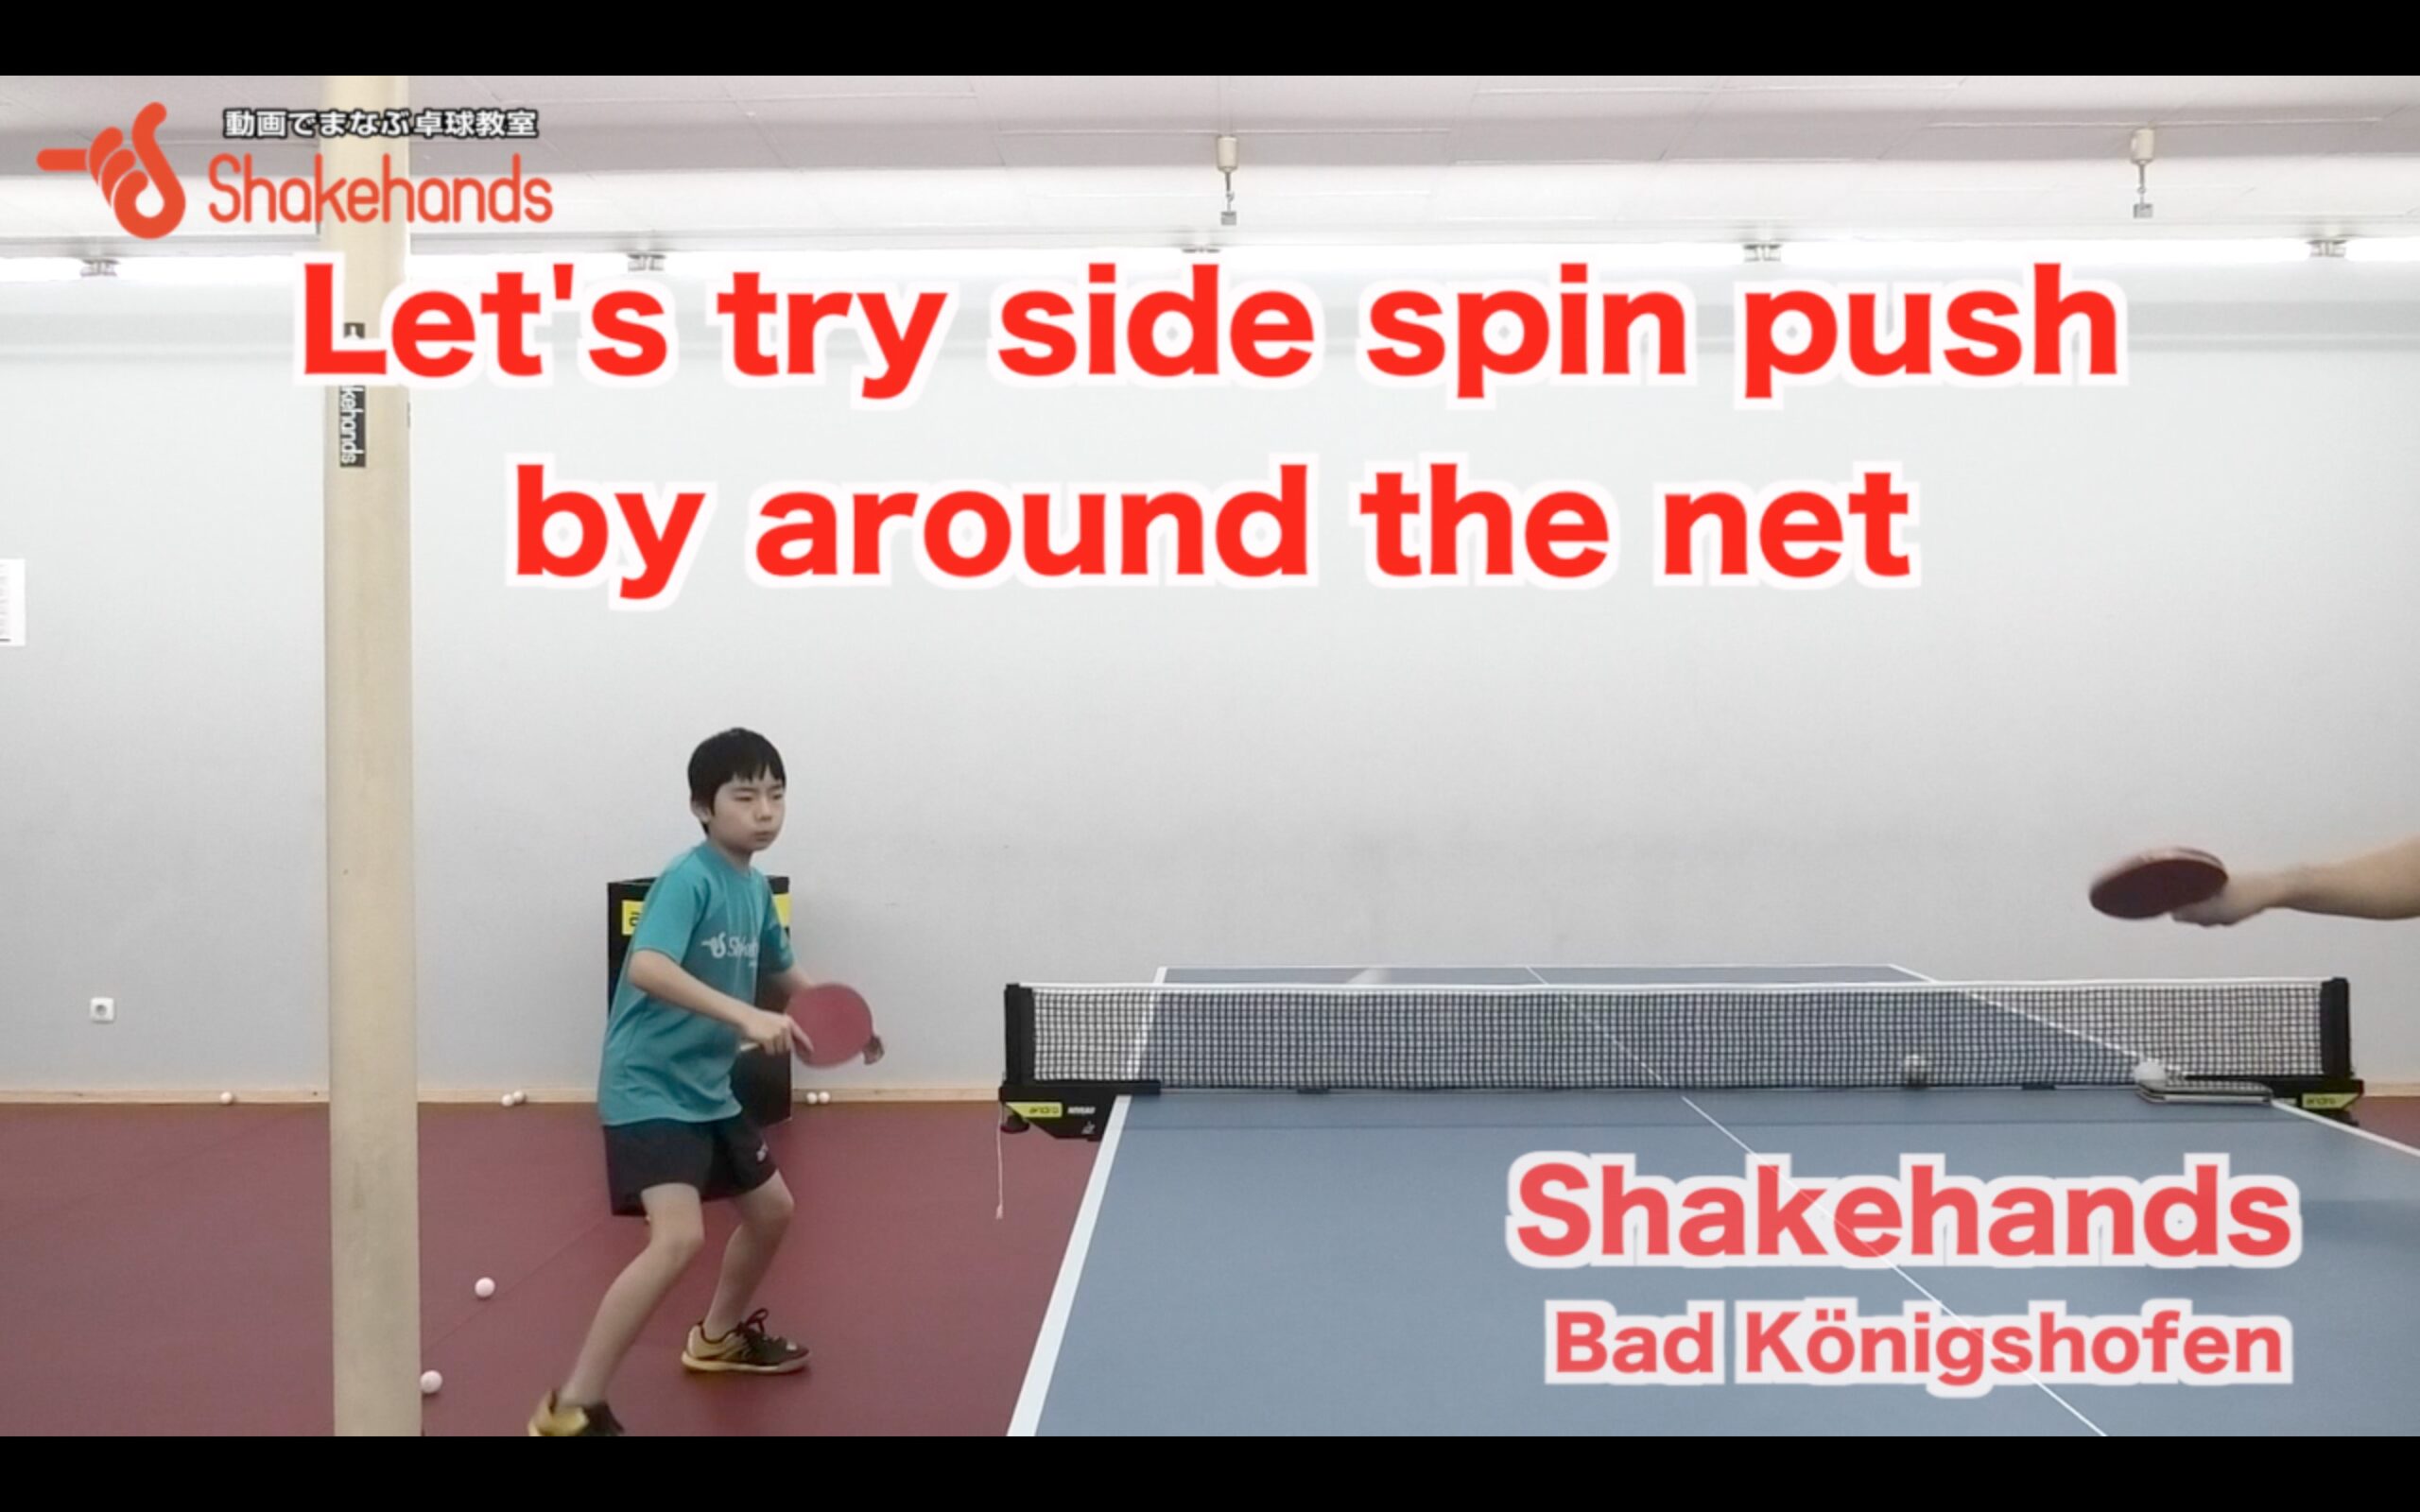 Let's try side spin push by around the net